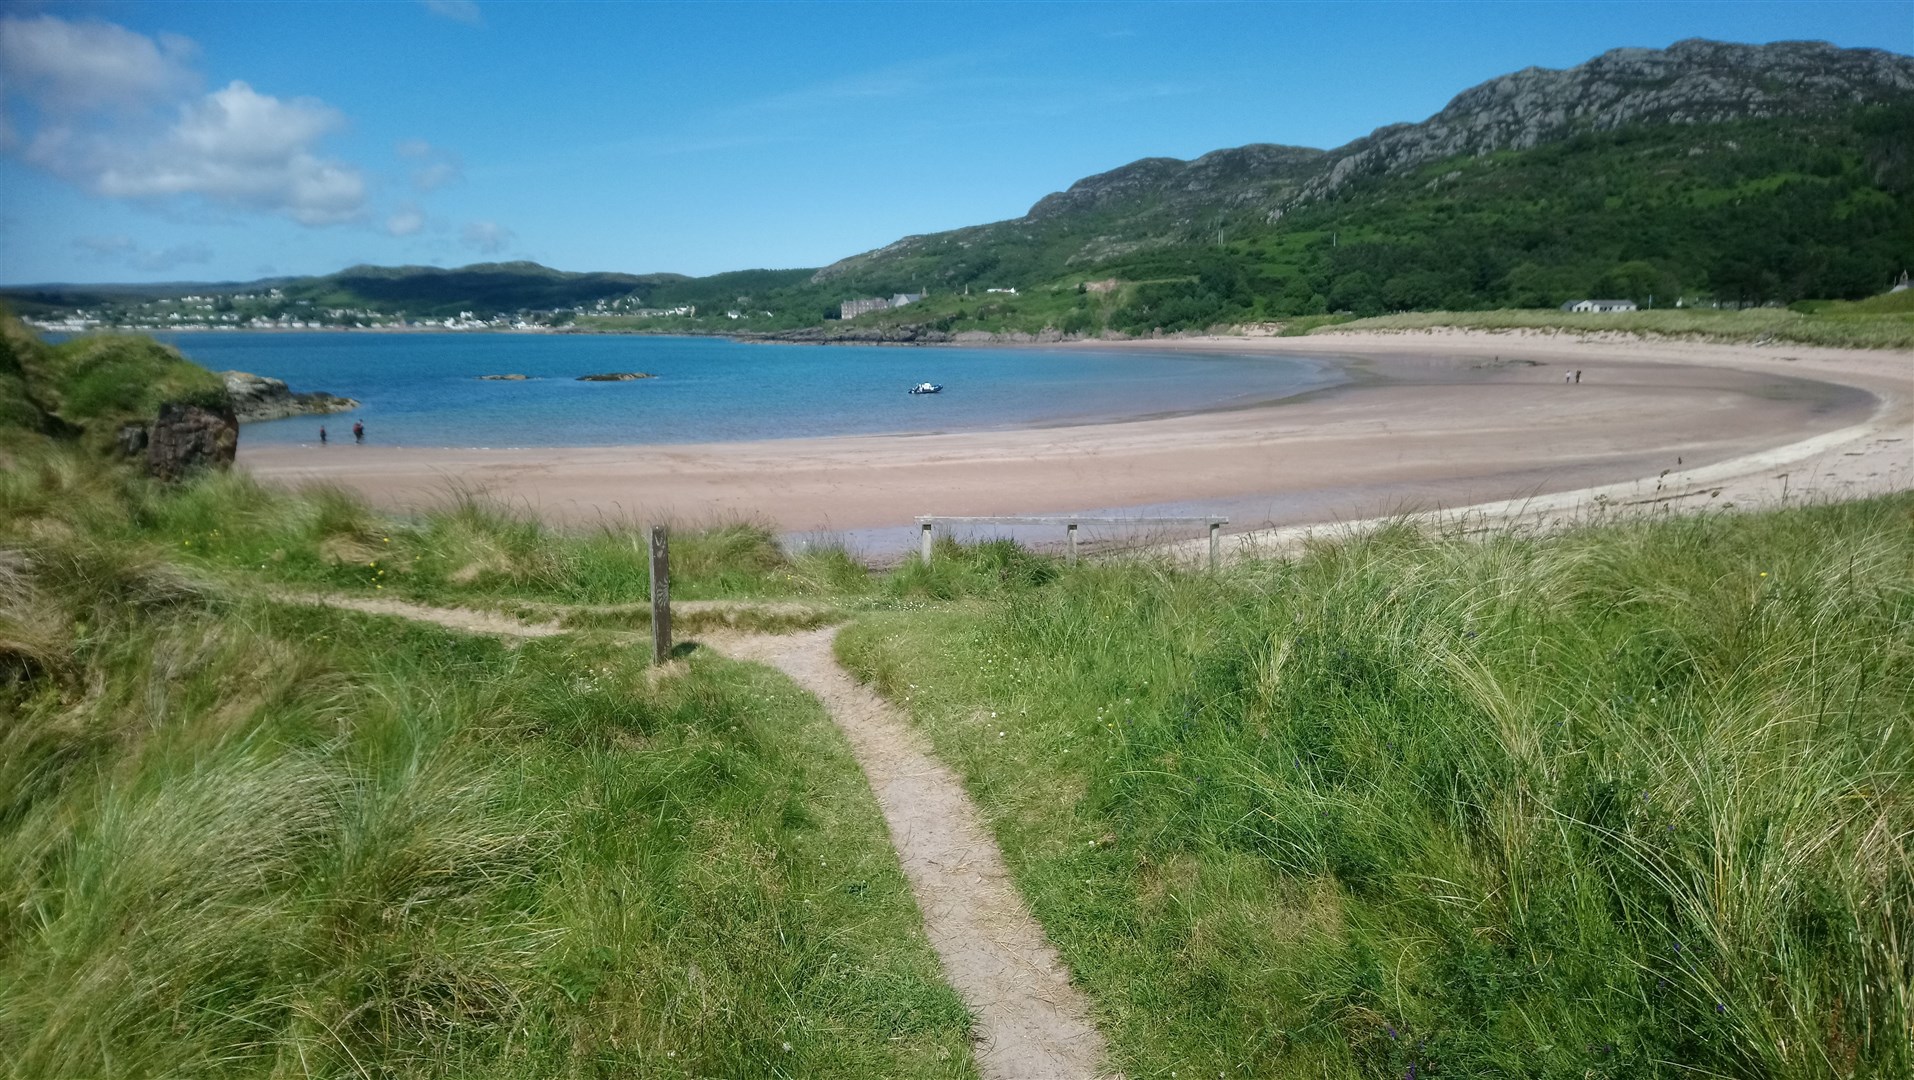 Gairloch beach which will get a car park, new toilets and motorhome waste facility, thanks to funding from the Rural Tourism Infrastructure Fund (RTIF).